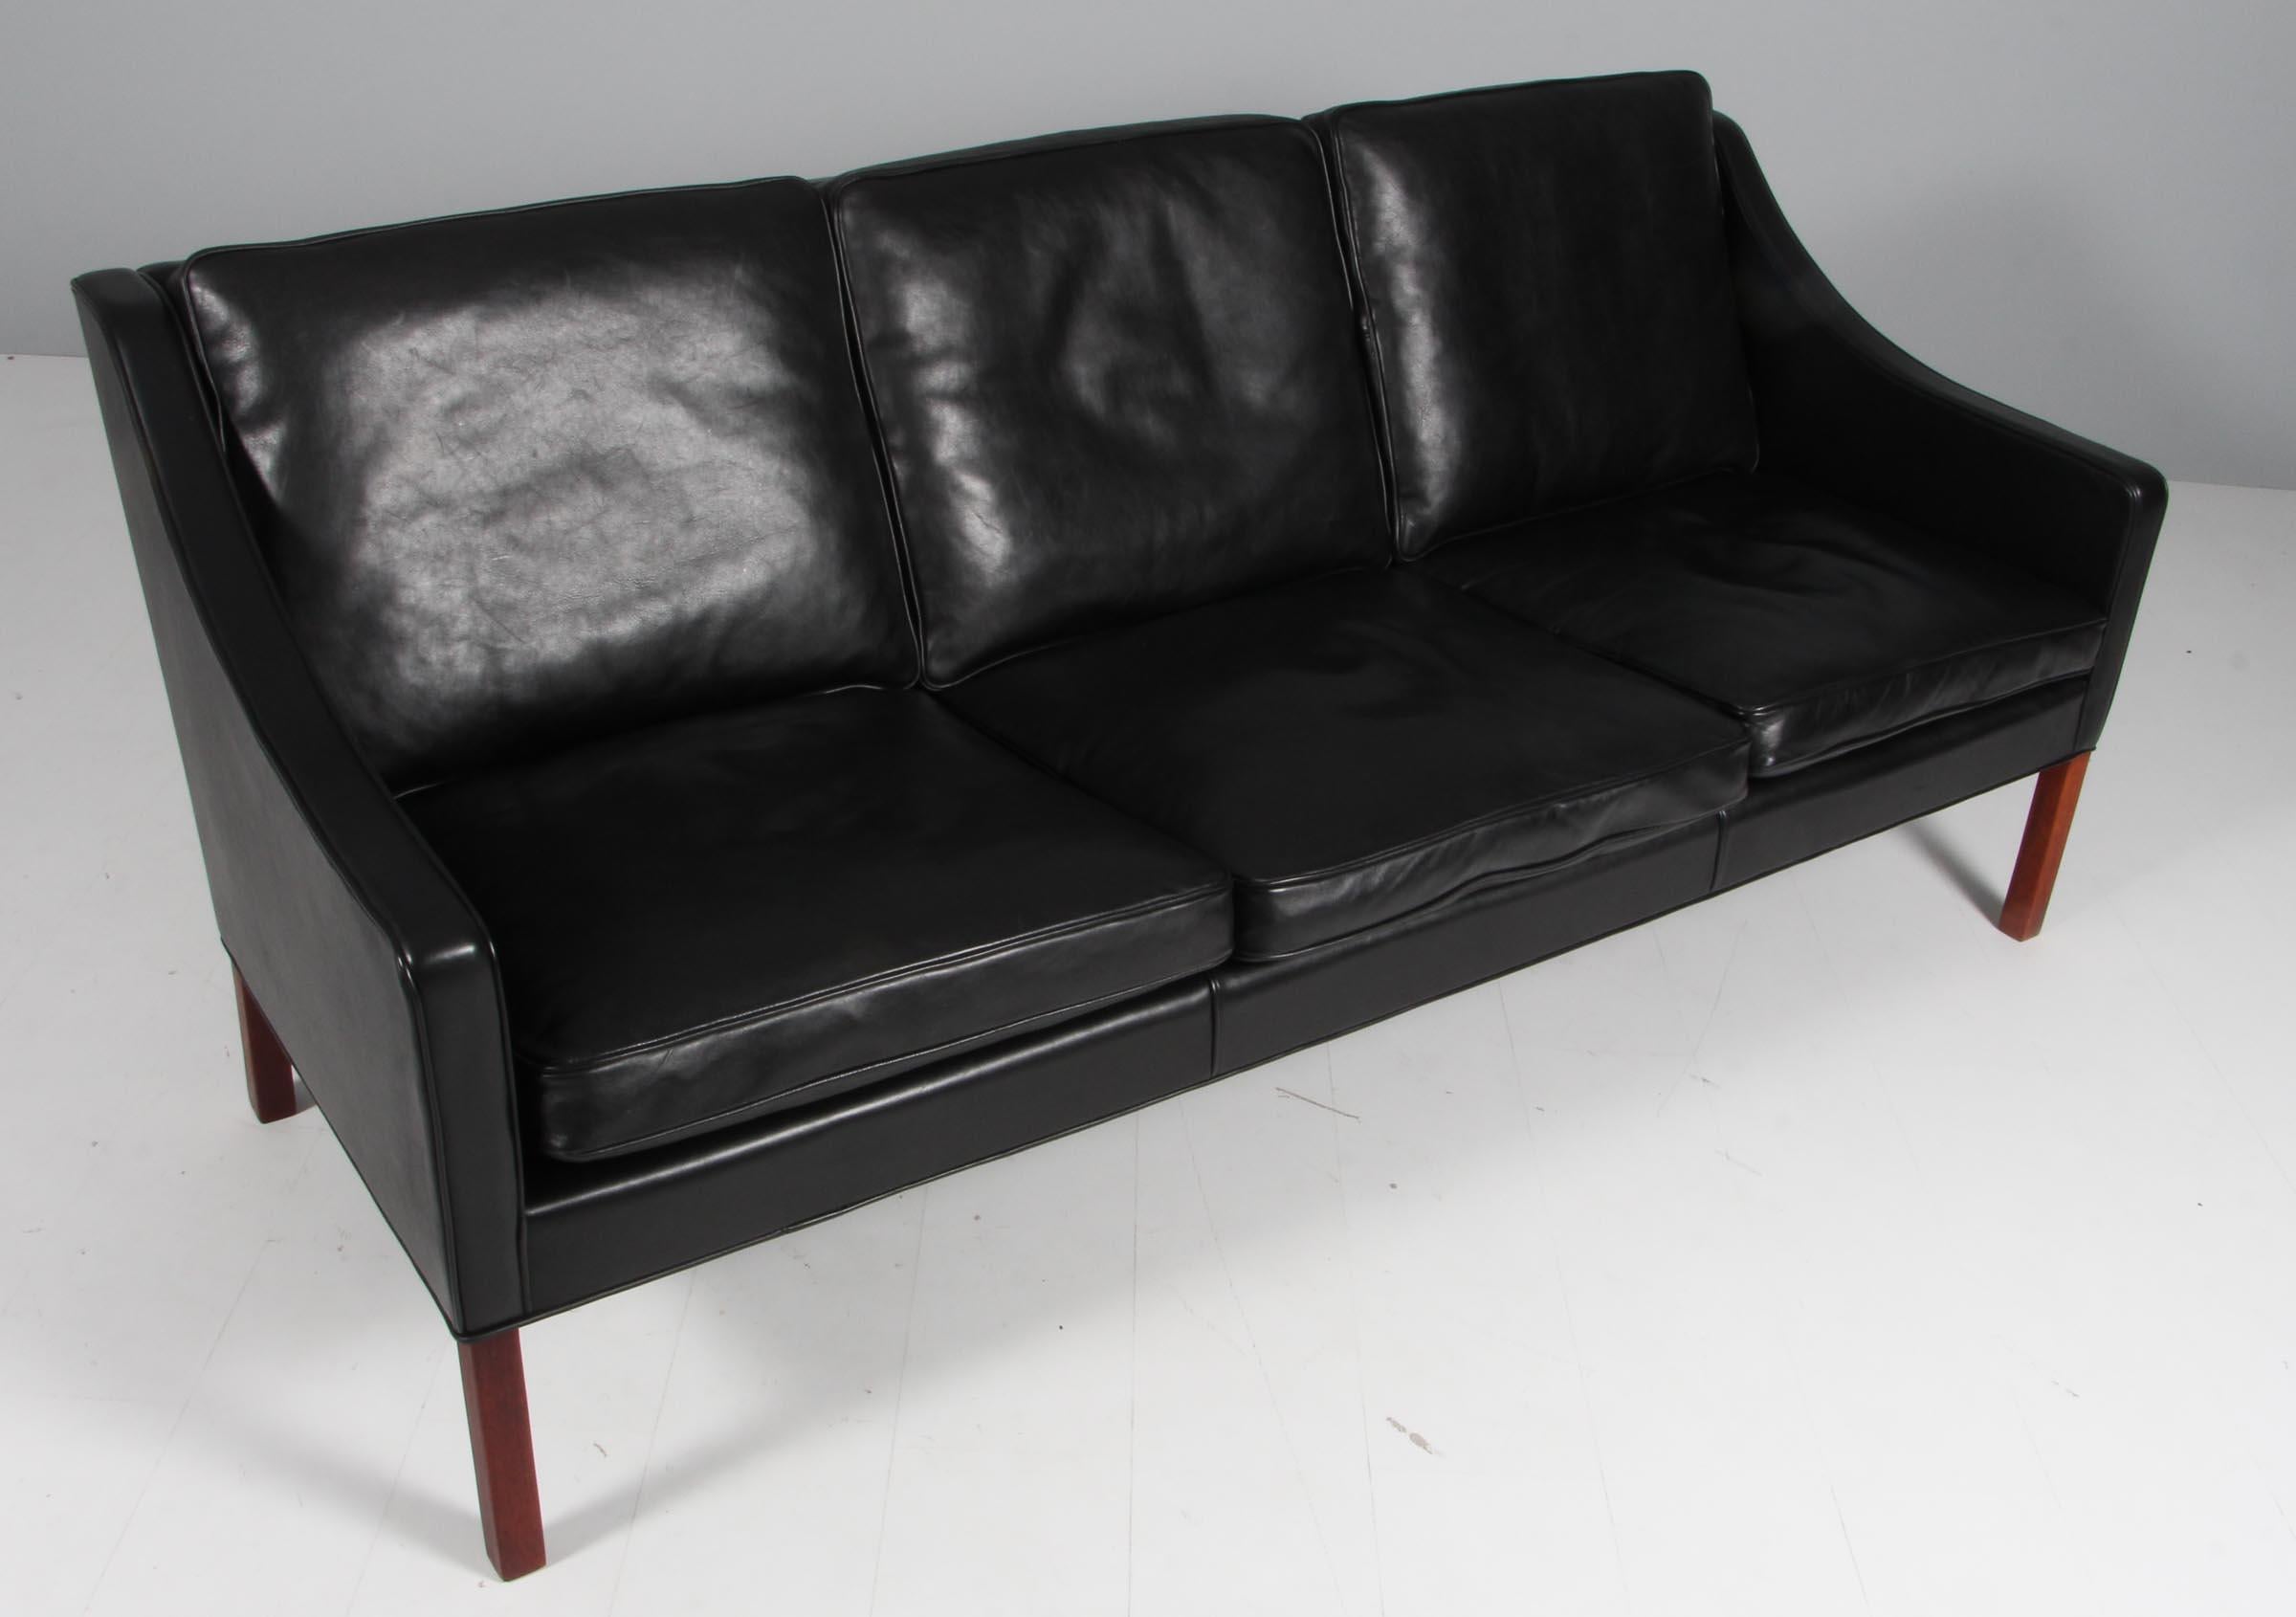 Børge Mogensen three-seat sofa original upholstered in black leather.

Legs of mahogany.

Model 2209, made by Fredericia Furniture.